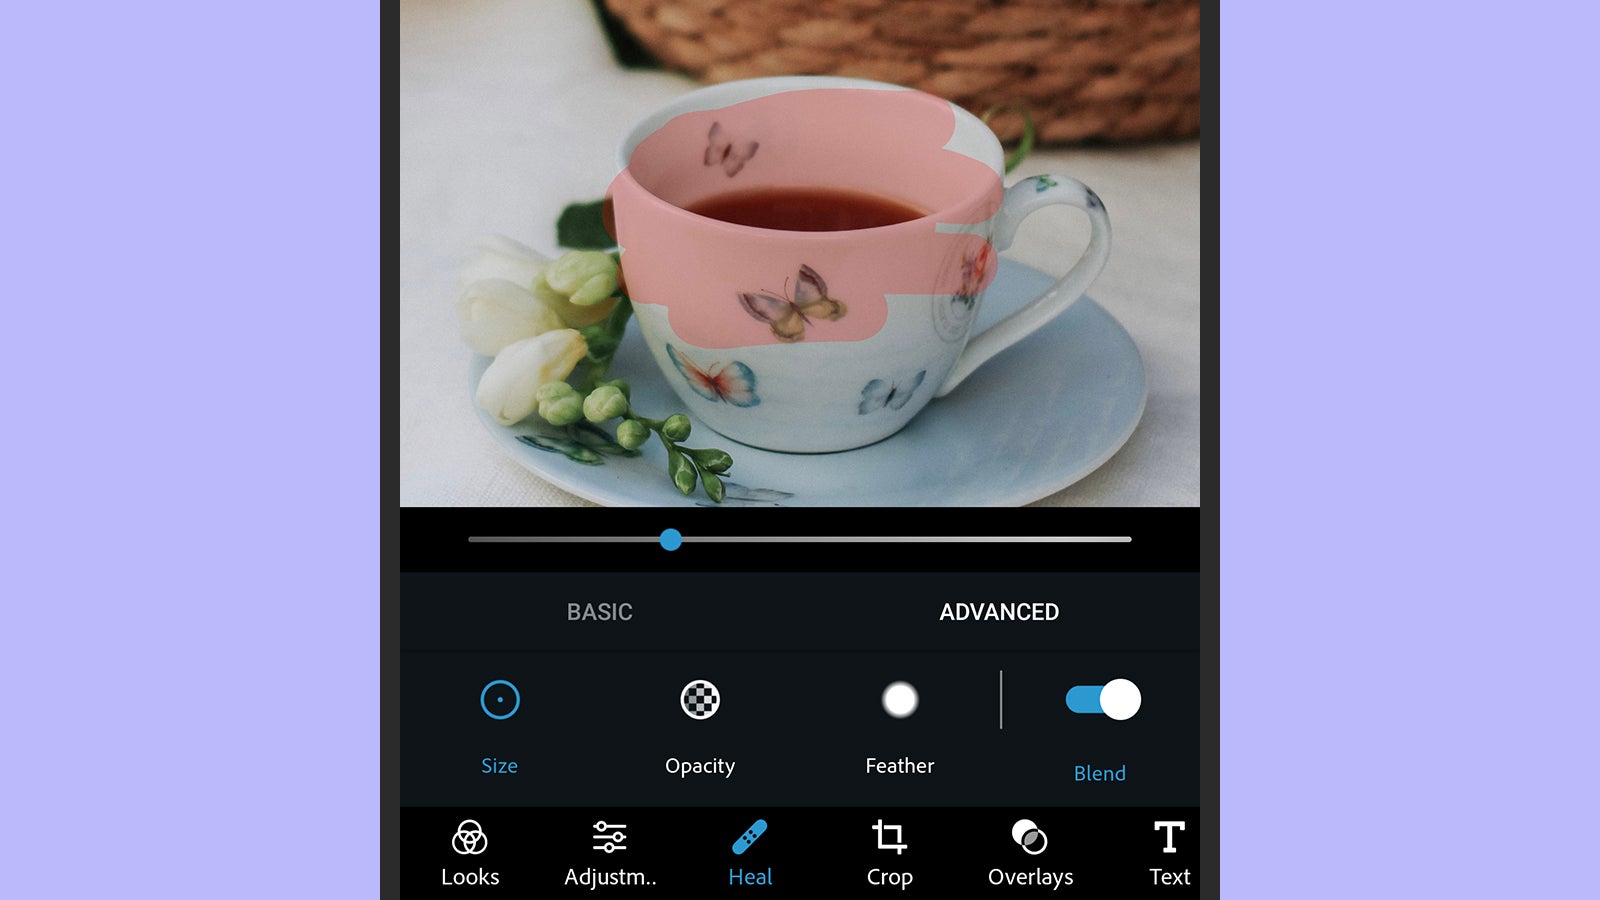 Adobe's mobile apps can remove objects too. (Screenshot: Adobe Photoshop Express)